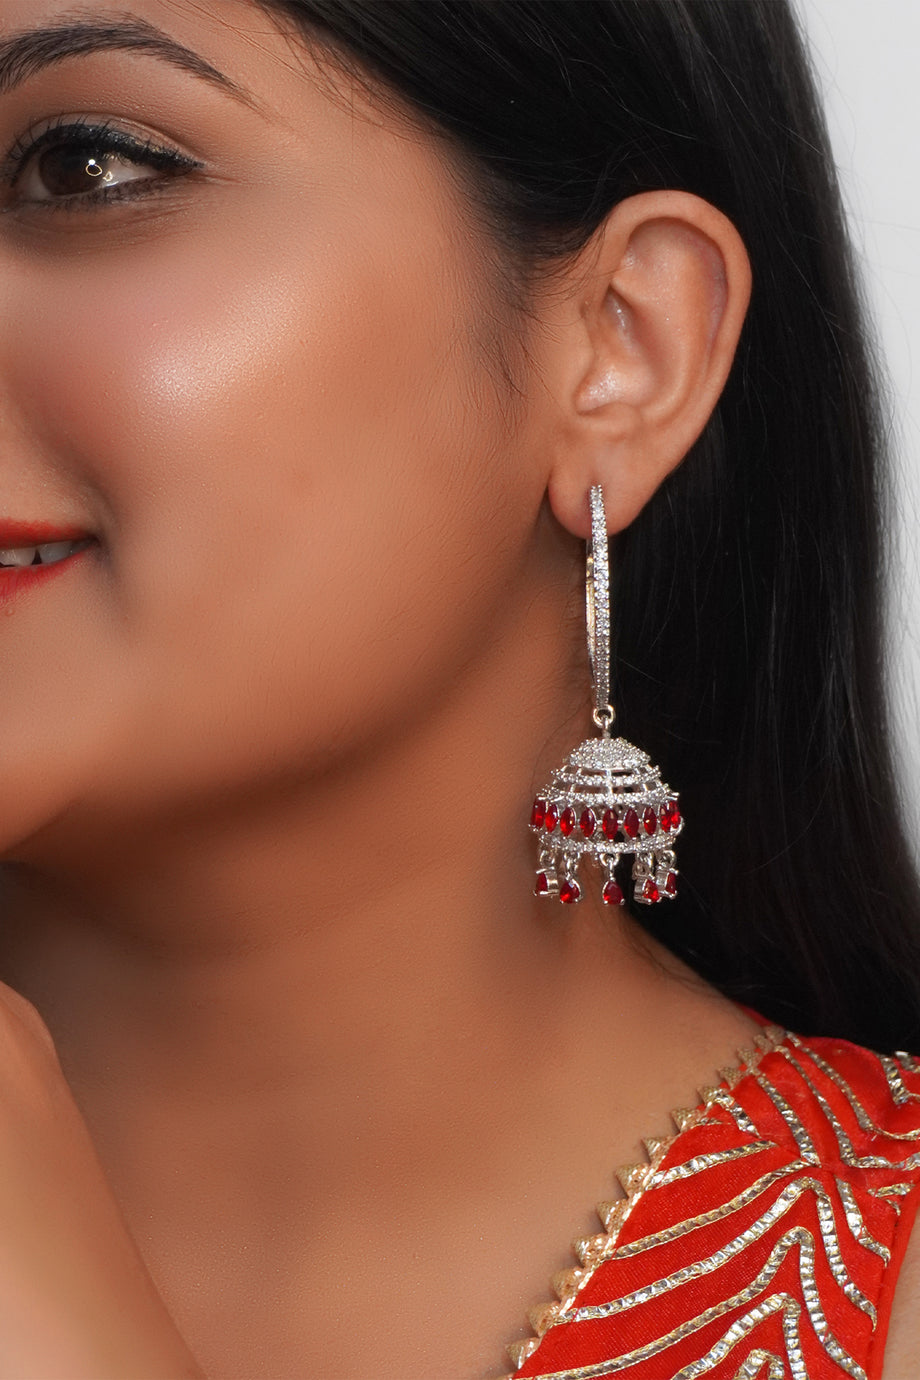 Flipkart.com - Buy RAJ JEWELLERY Traditional Ethnic Antique Red Color  Oxidized Jhumka Jhumki for Women and Girls Alloy Chandbali Earring, Jhumki  Earring, Earring Set Online at Best Prices in India